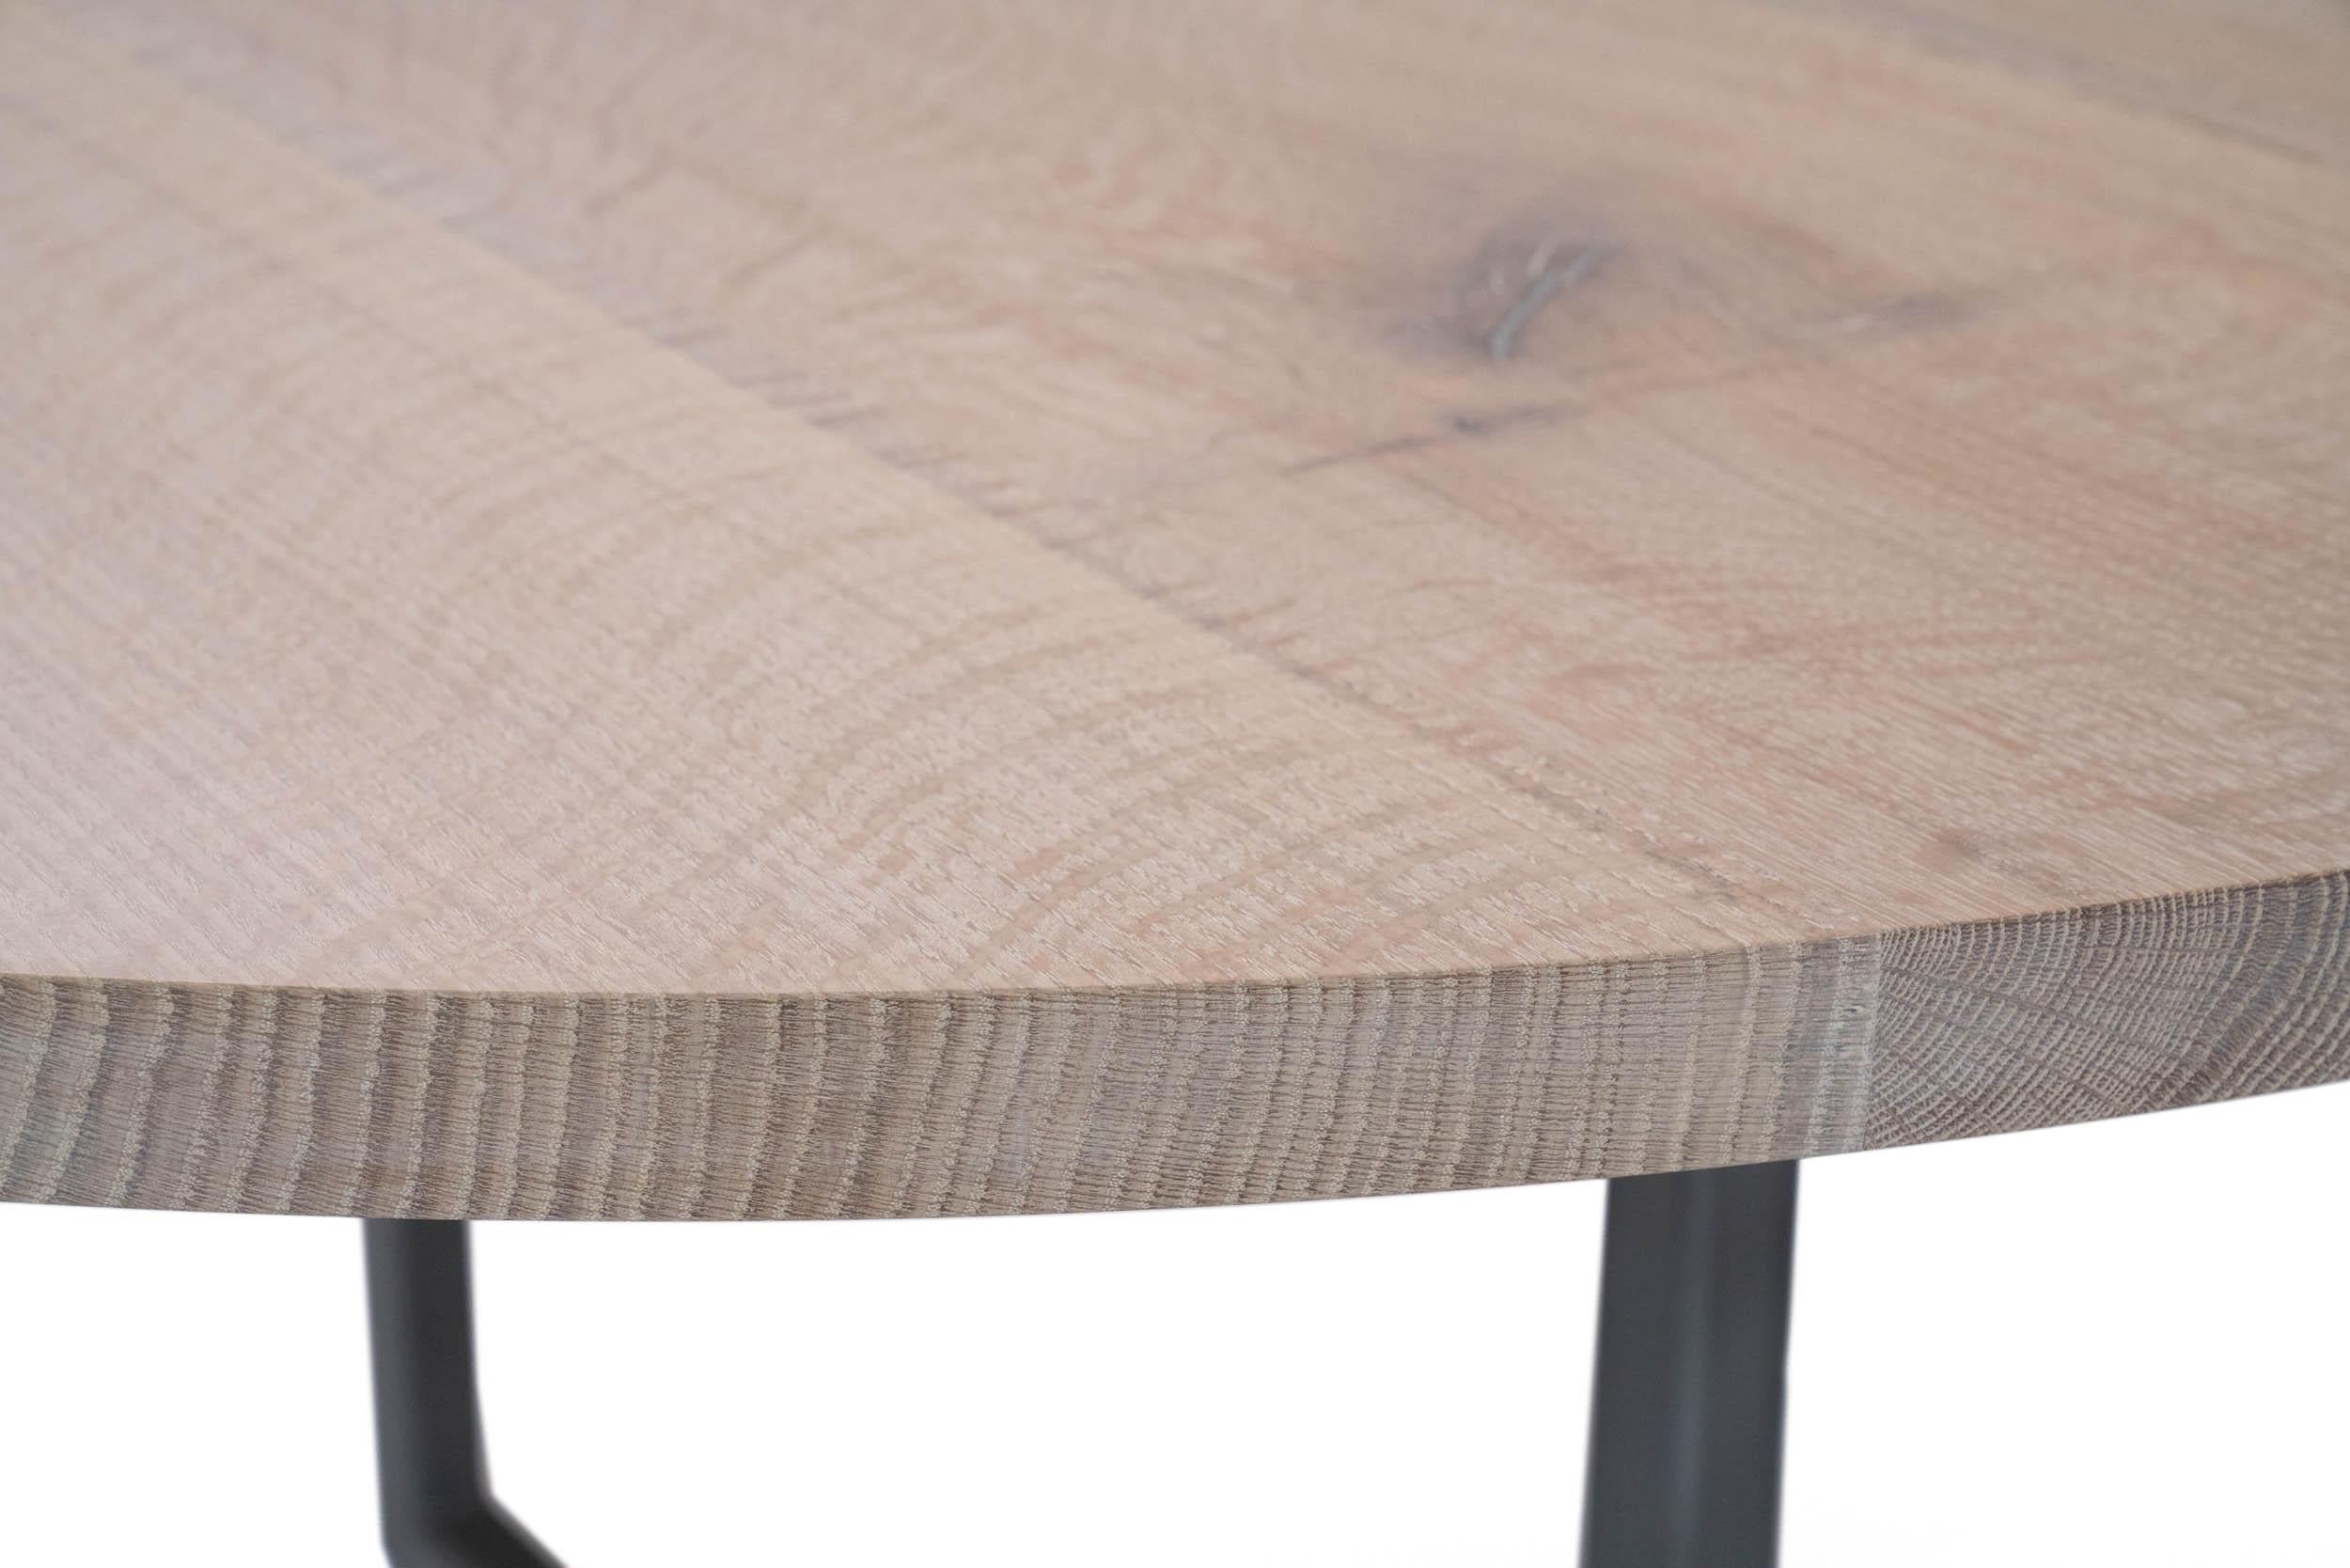 60 in round dining table